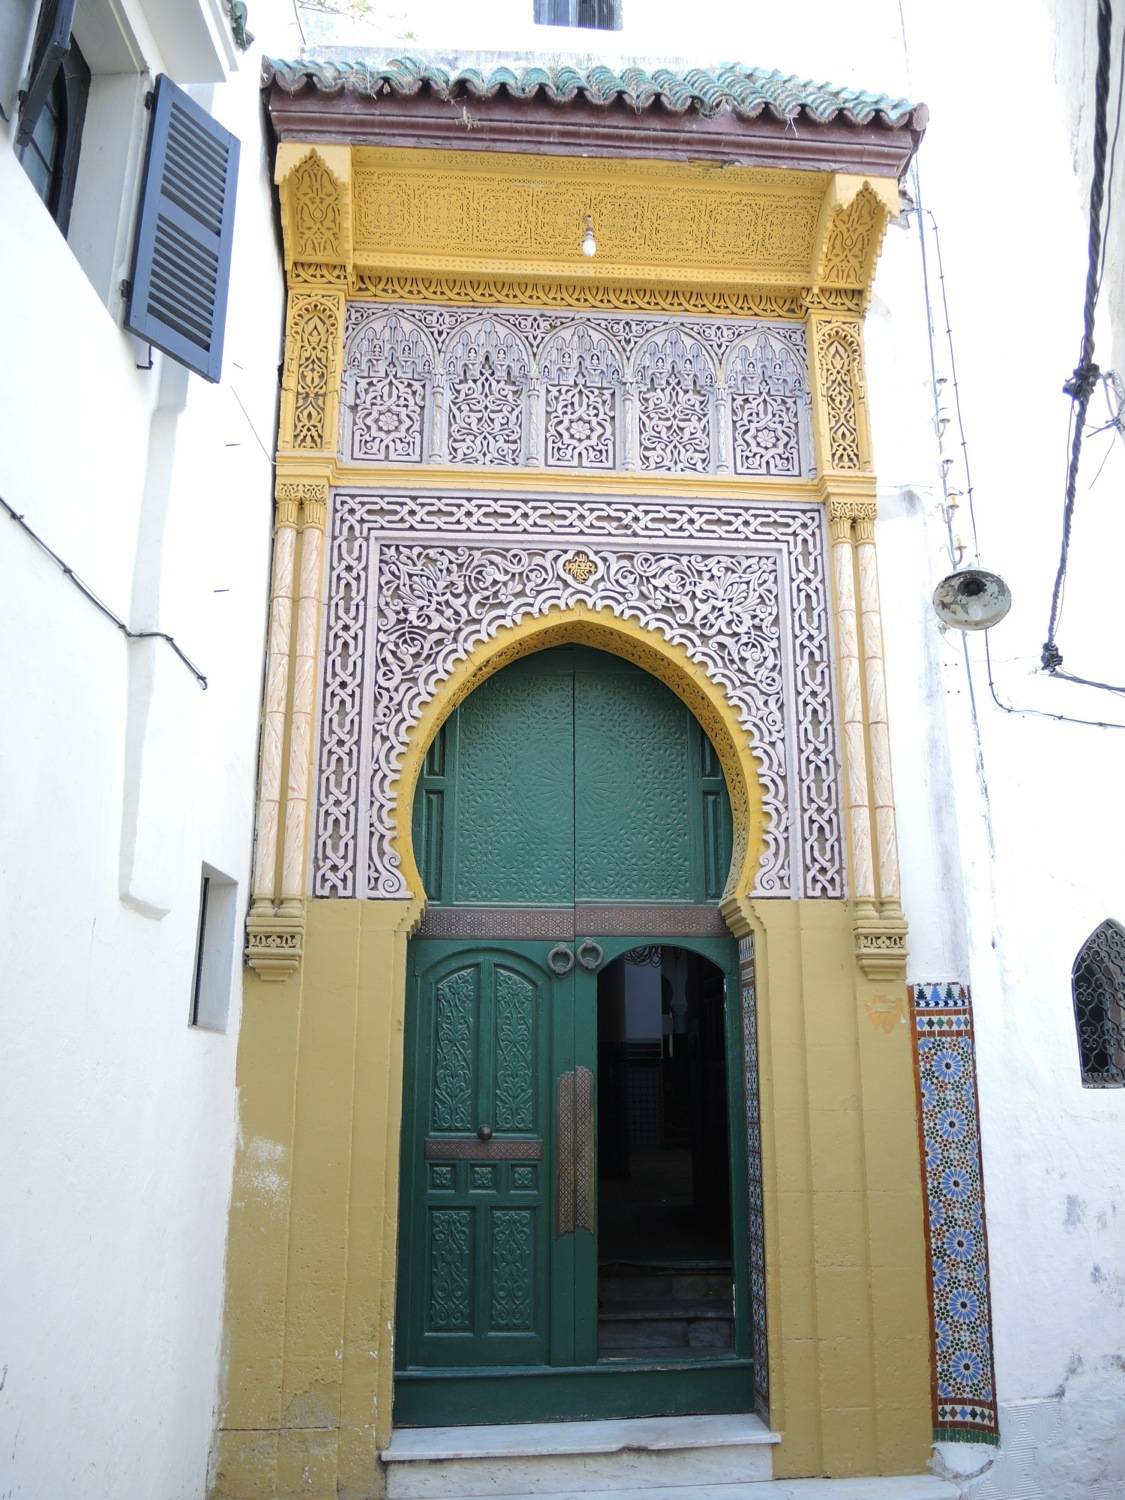 View of the main portal